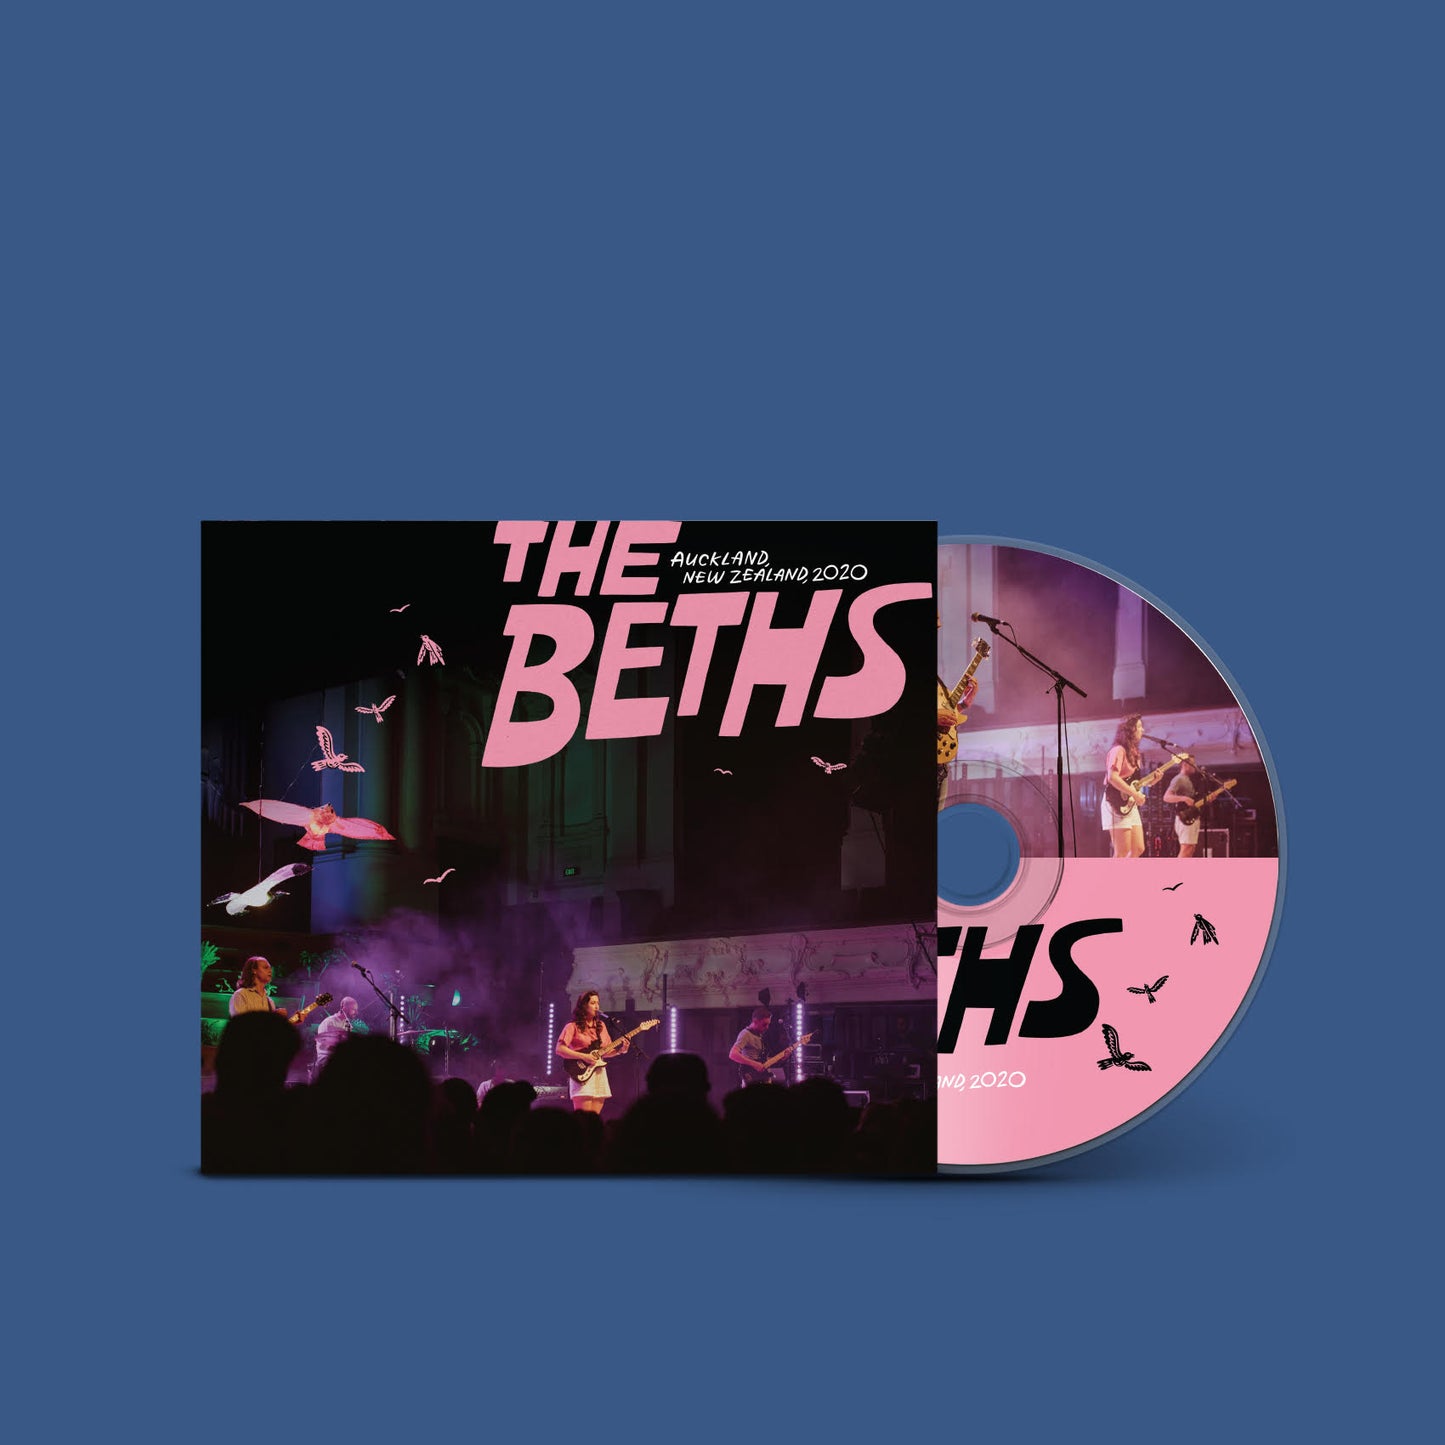 
                  
                    The Beths - Auckland, New Zealand, 2020
                  
                